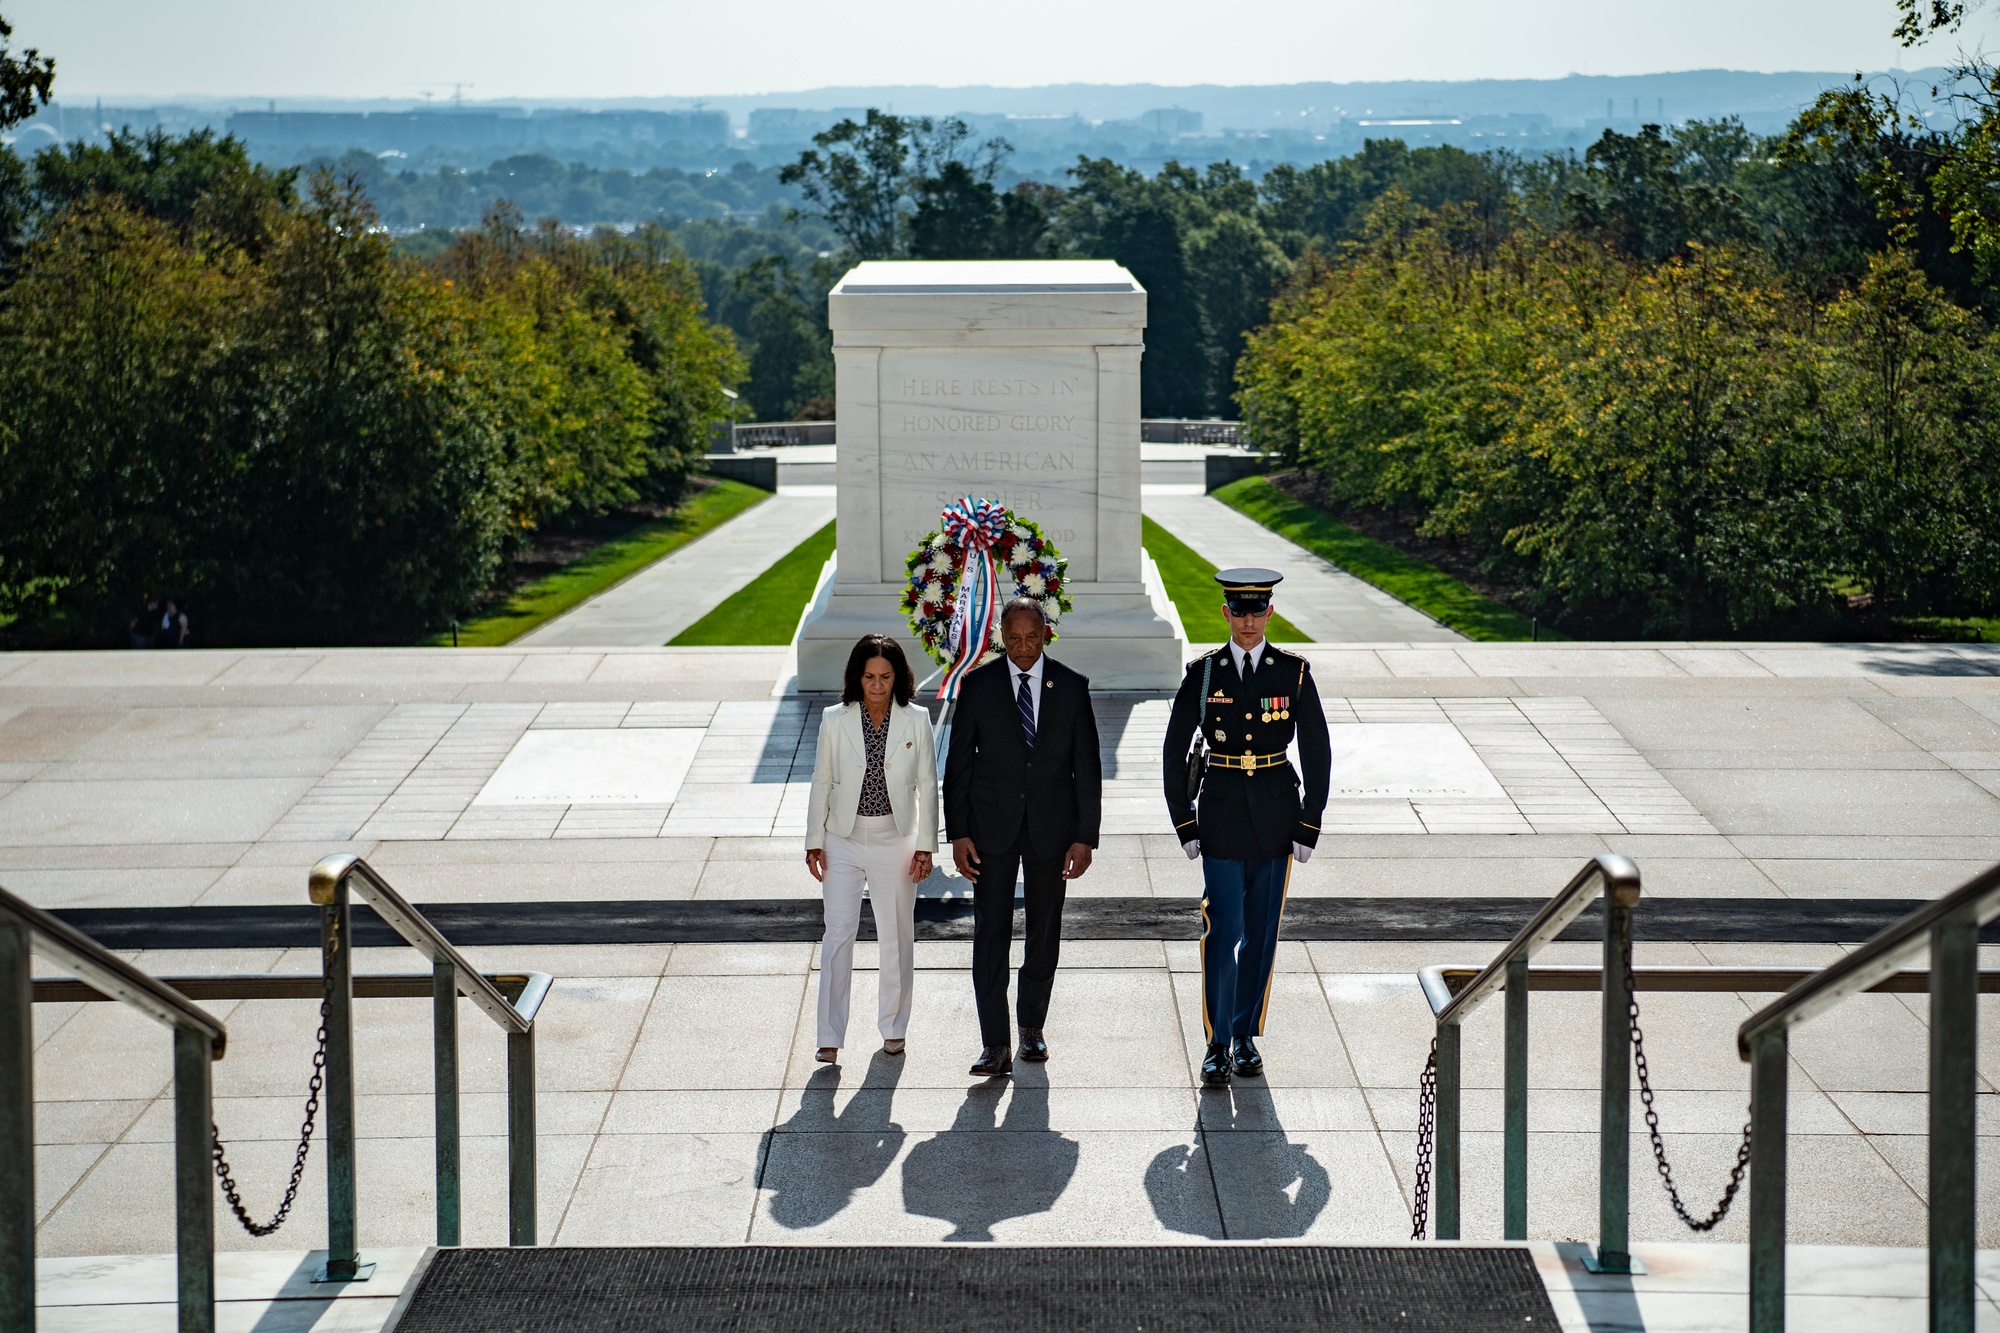 DVIDS - Images - U.S. Marshals Service Director Donald W. Washington  Participates in a Public Wreath-Laying Ceremony at the Tomb of the Unknown  Soldier [Image 8 of 25]